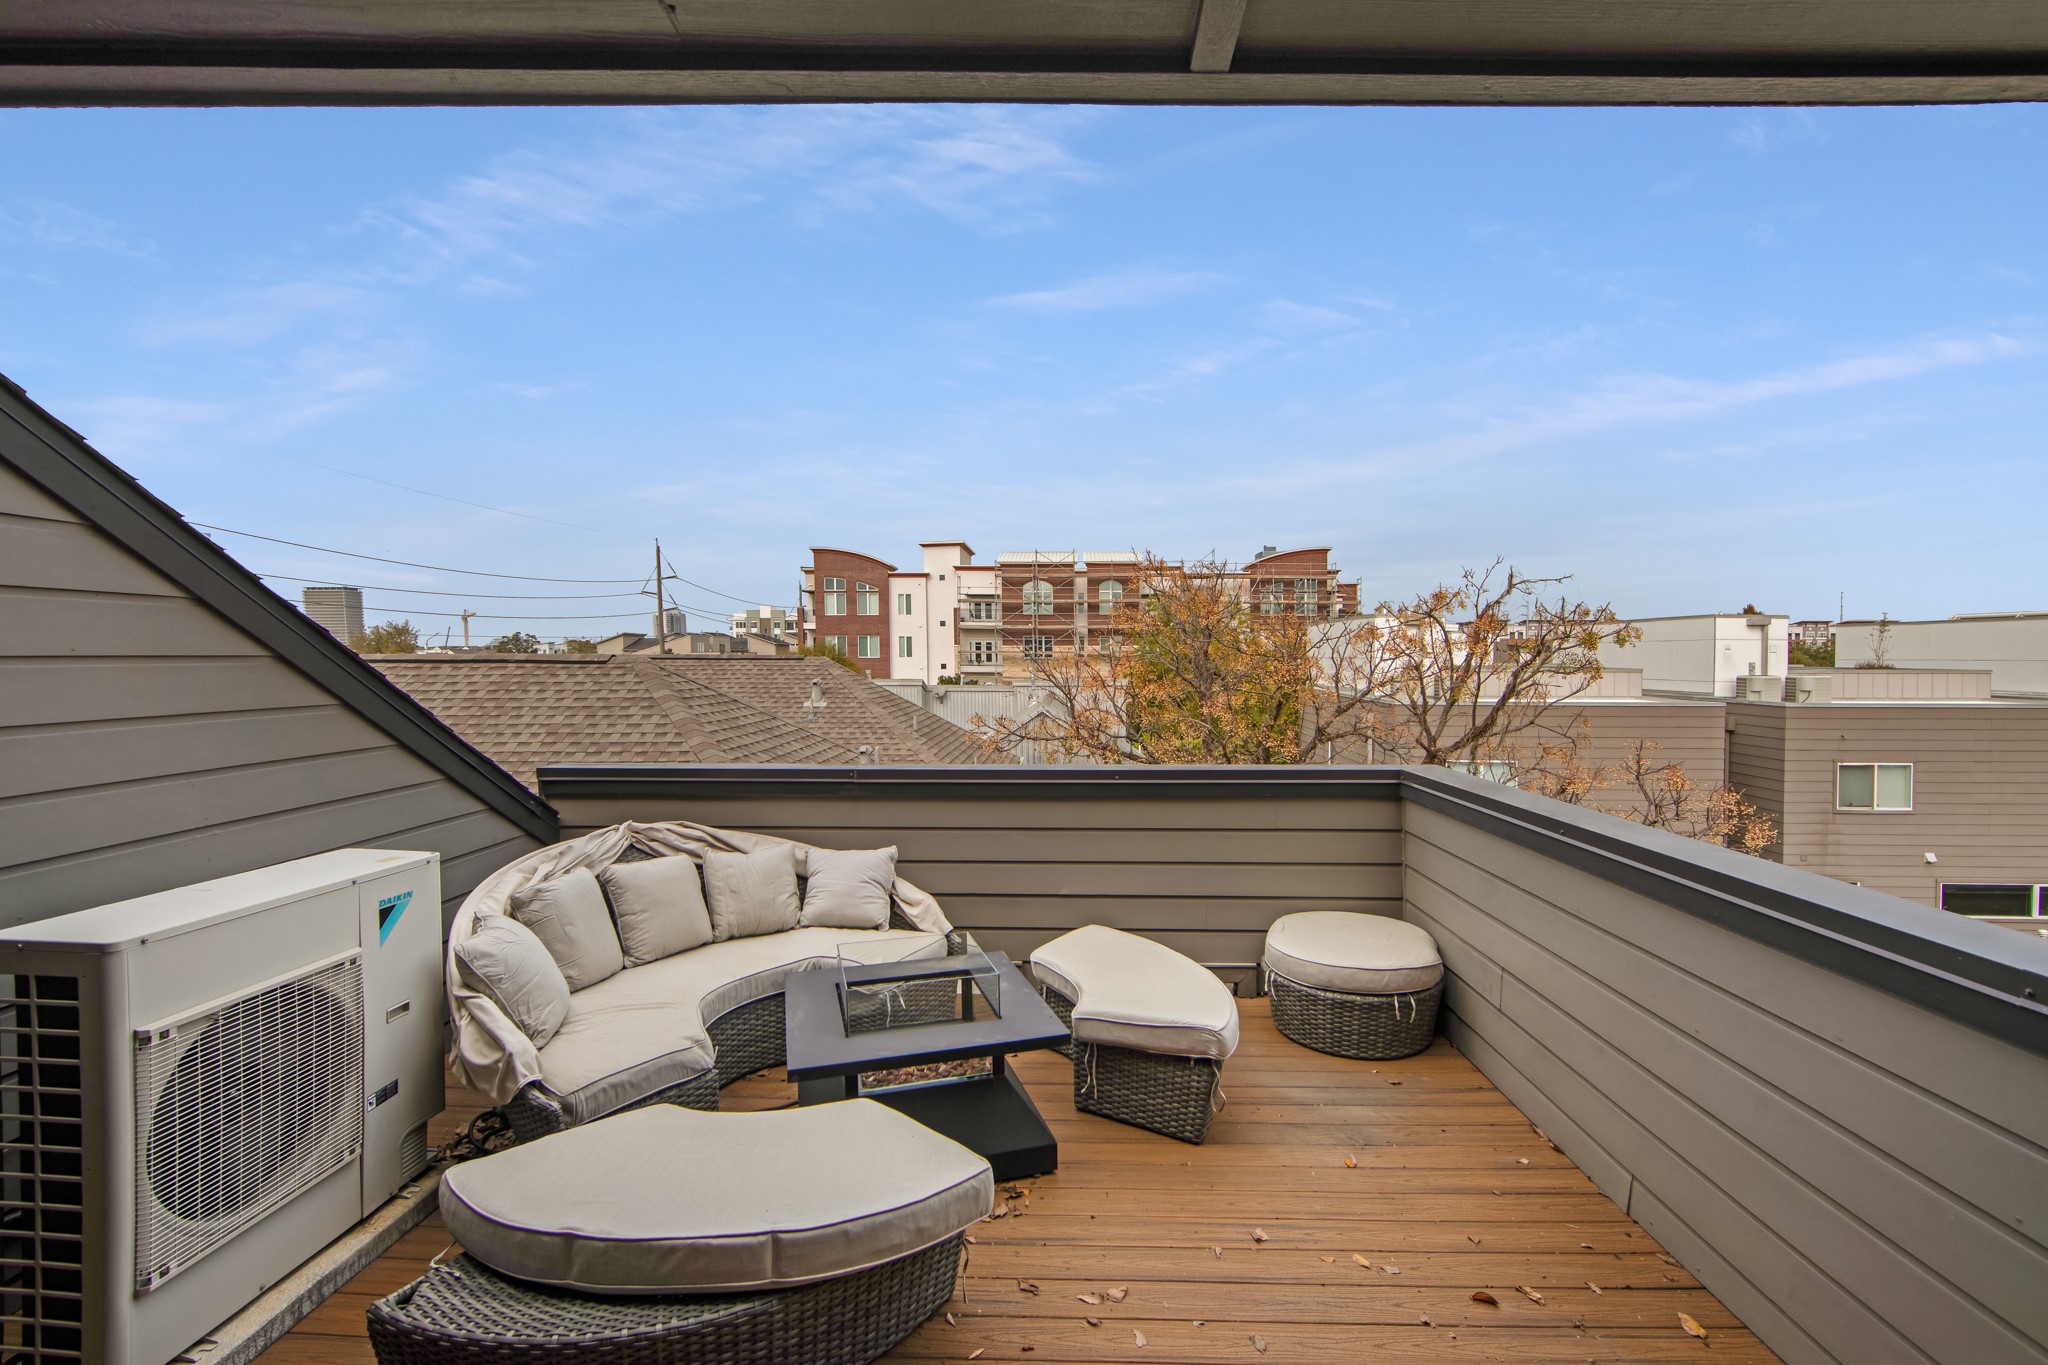 Not only is the patio's view breathtaking, but its also spacious and a great size for entertaining!